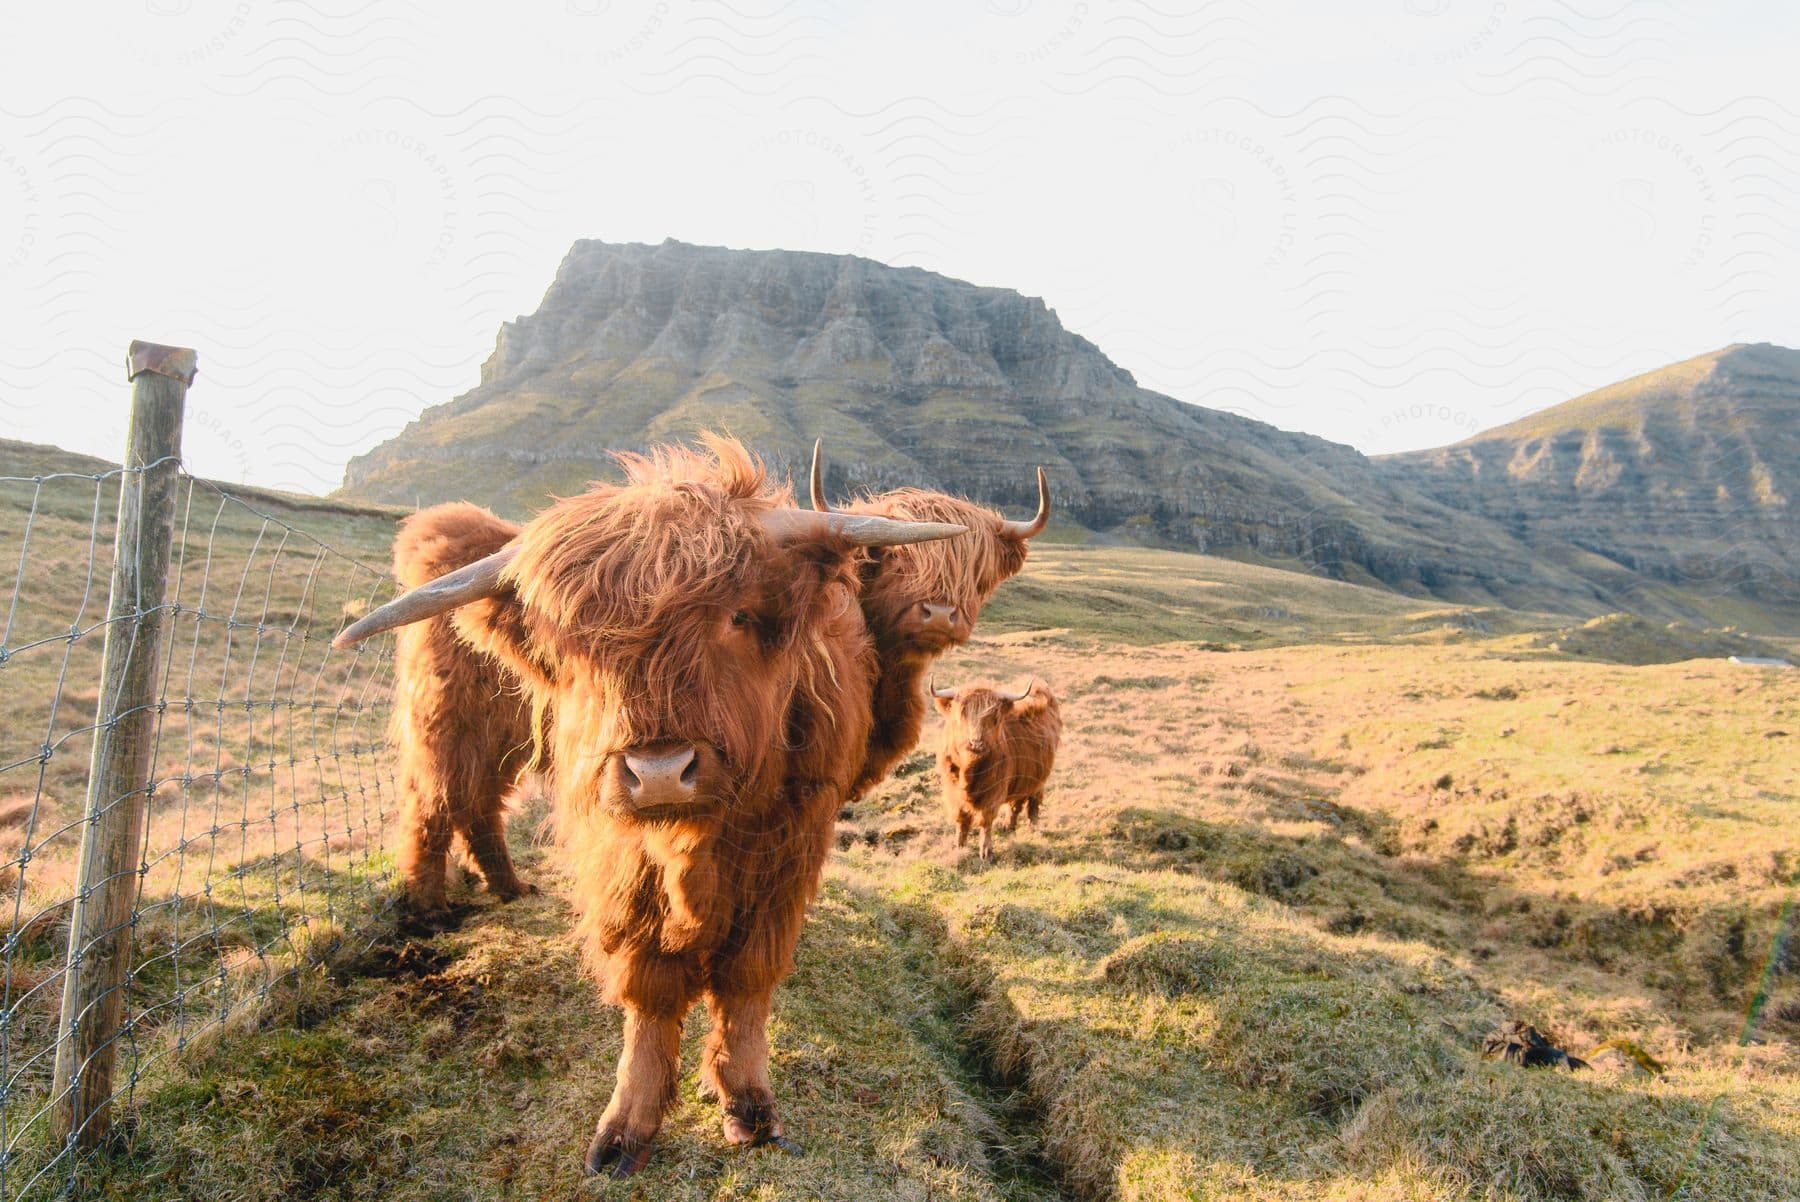 Scottish highland cattle with long hair and horns grazing in a grassy field